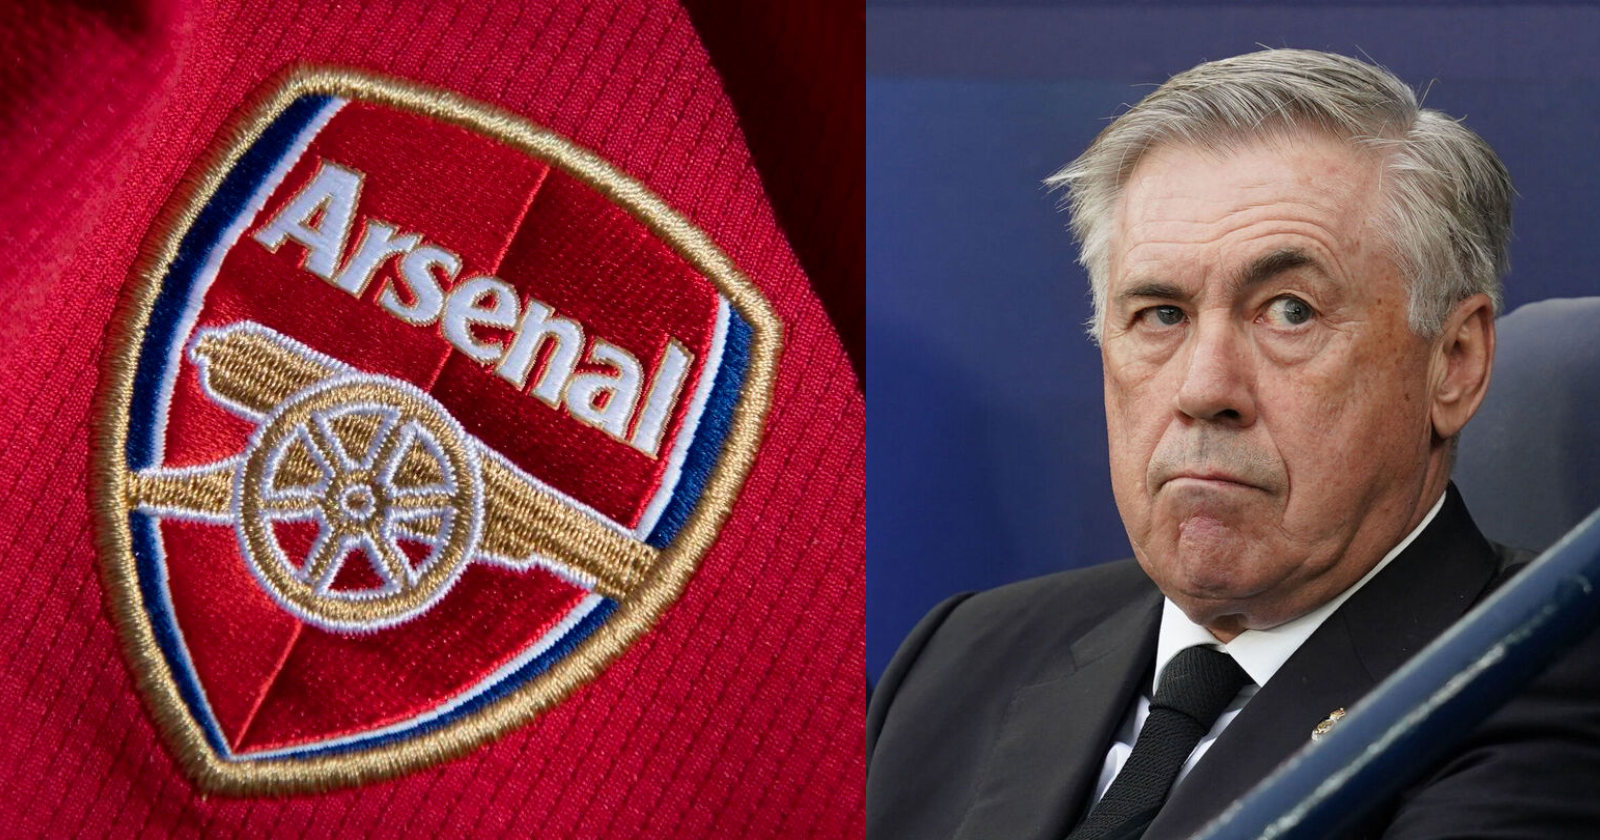 Real Madrid Has Come Up With An Offer For This Arsenal Player - Is He Going To Leave Now?